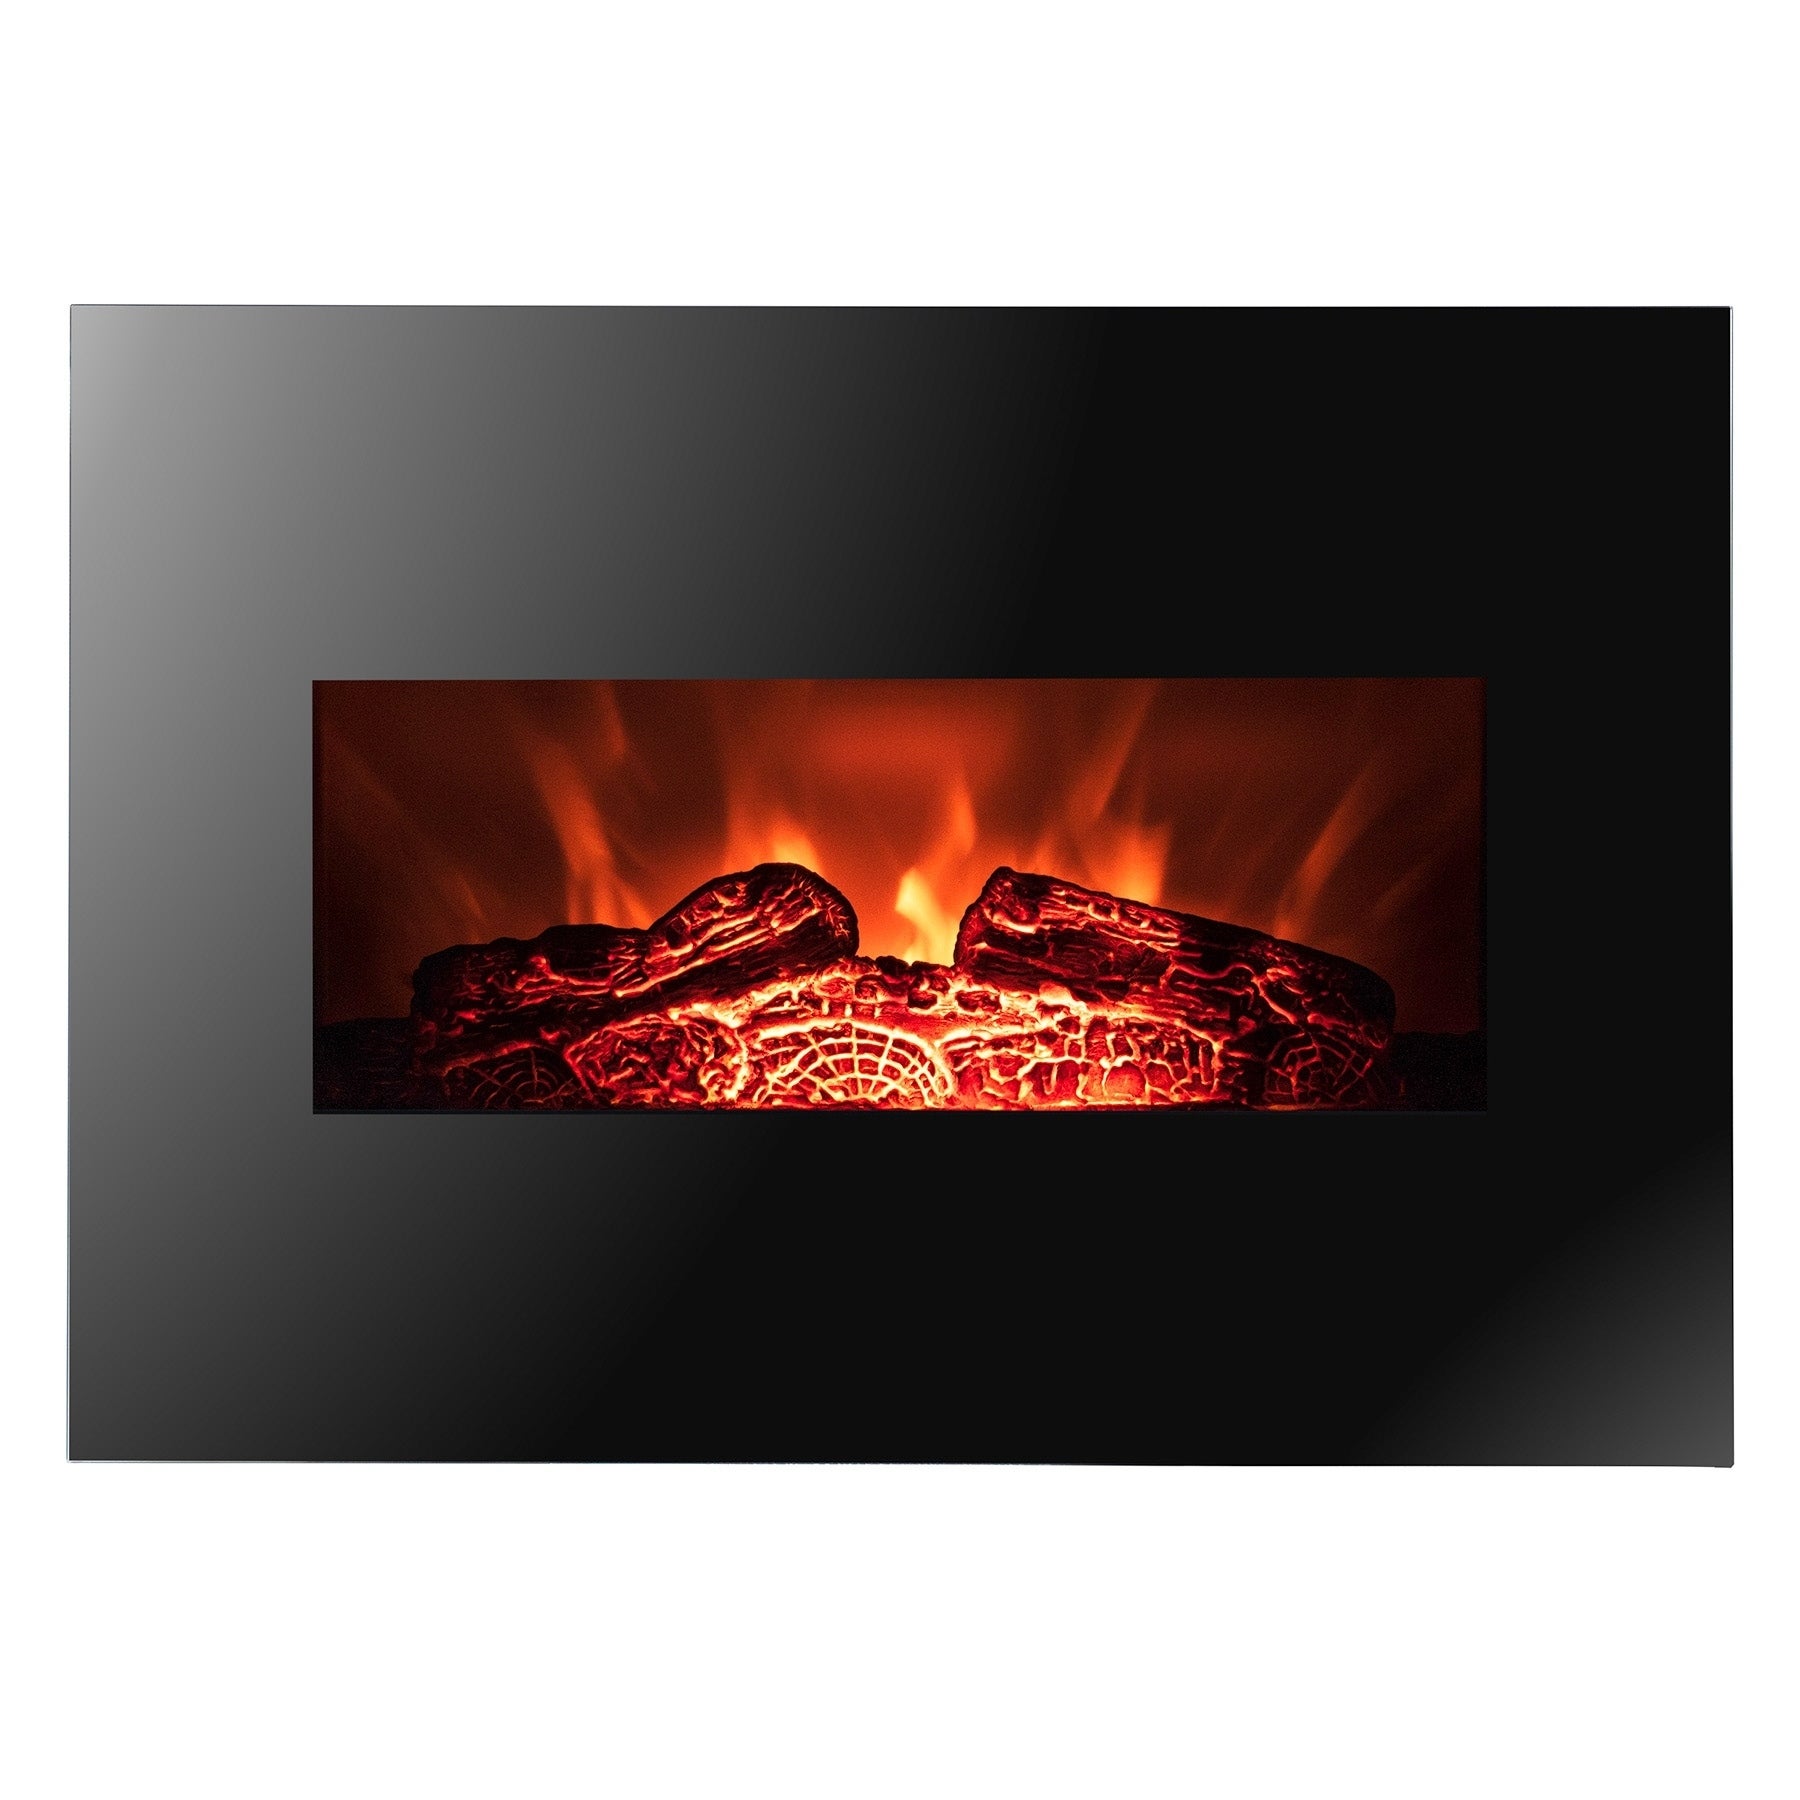 Mid Century Electric Fireplace New Golden Vantage Fp0063 26" Wall Mount Electric Fireplace 3d Flames Firebox W Logs Heater